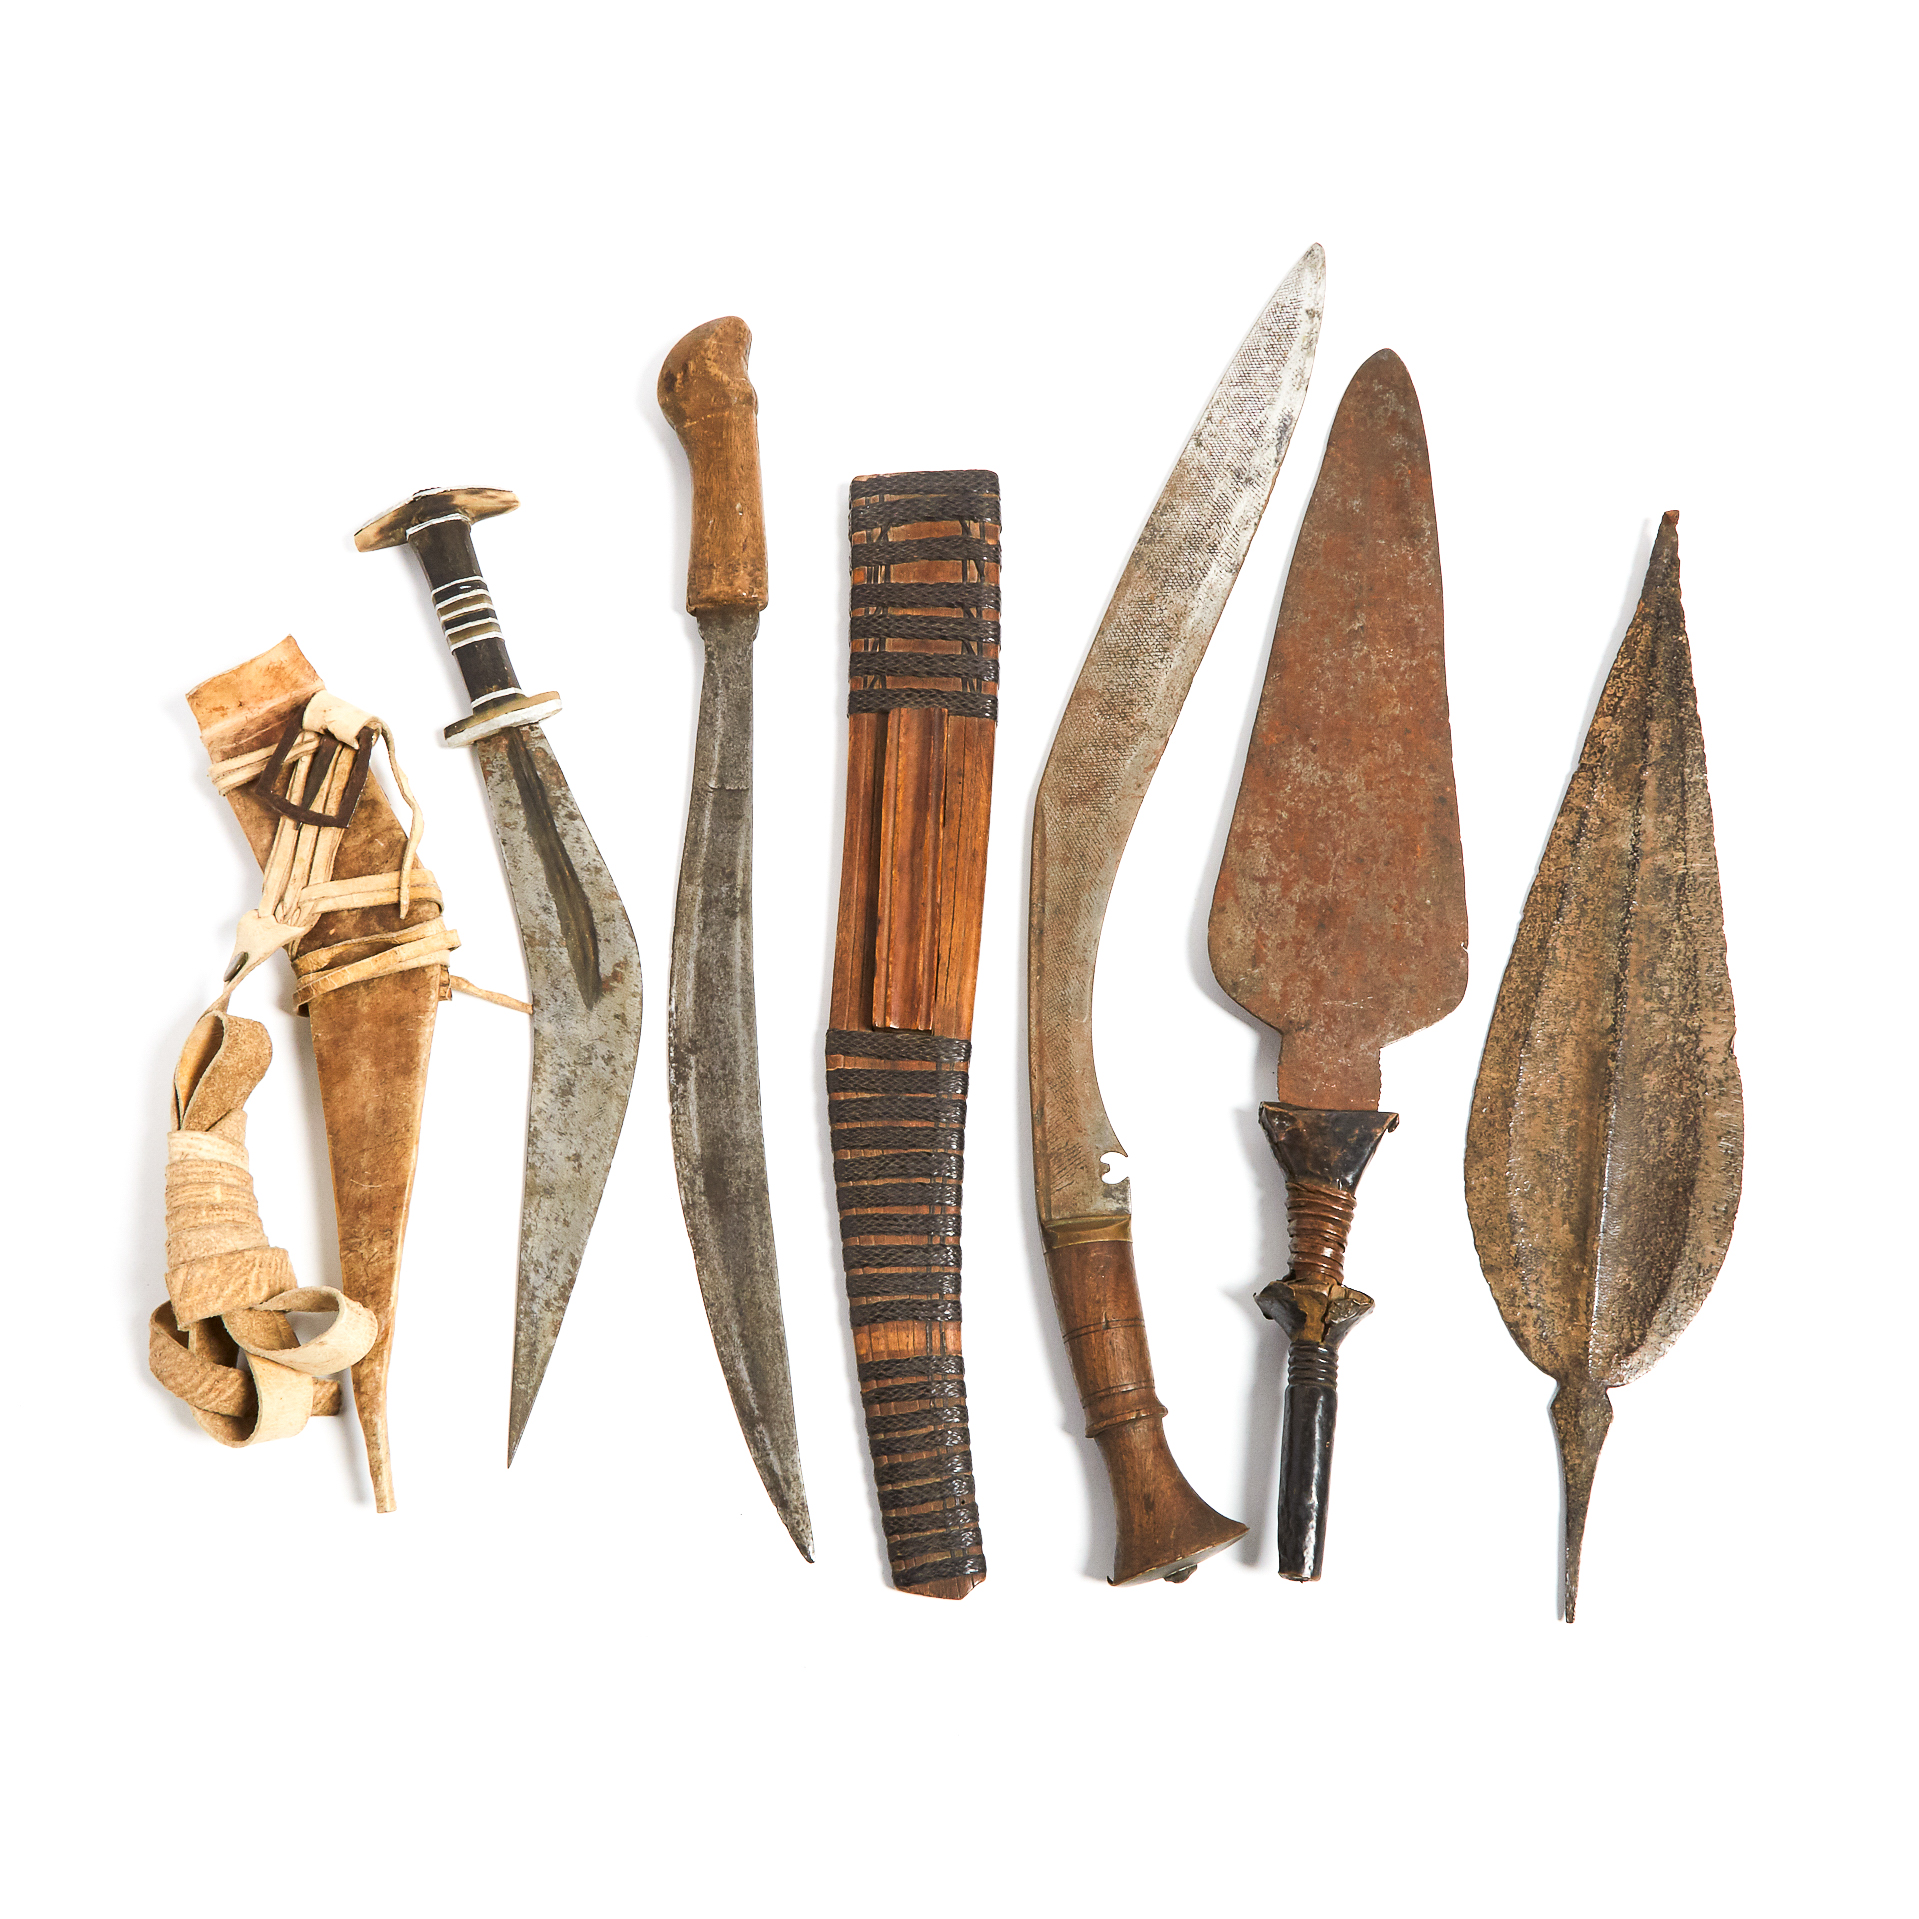 Group of Five African Edged Weapons